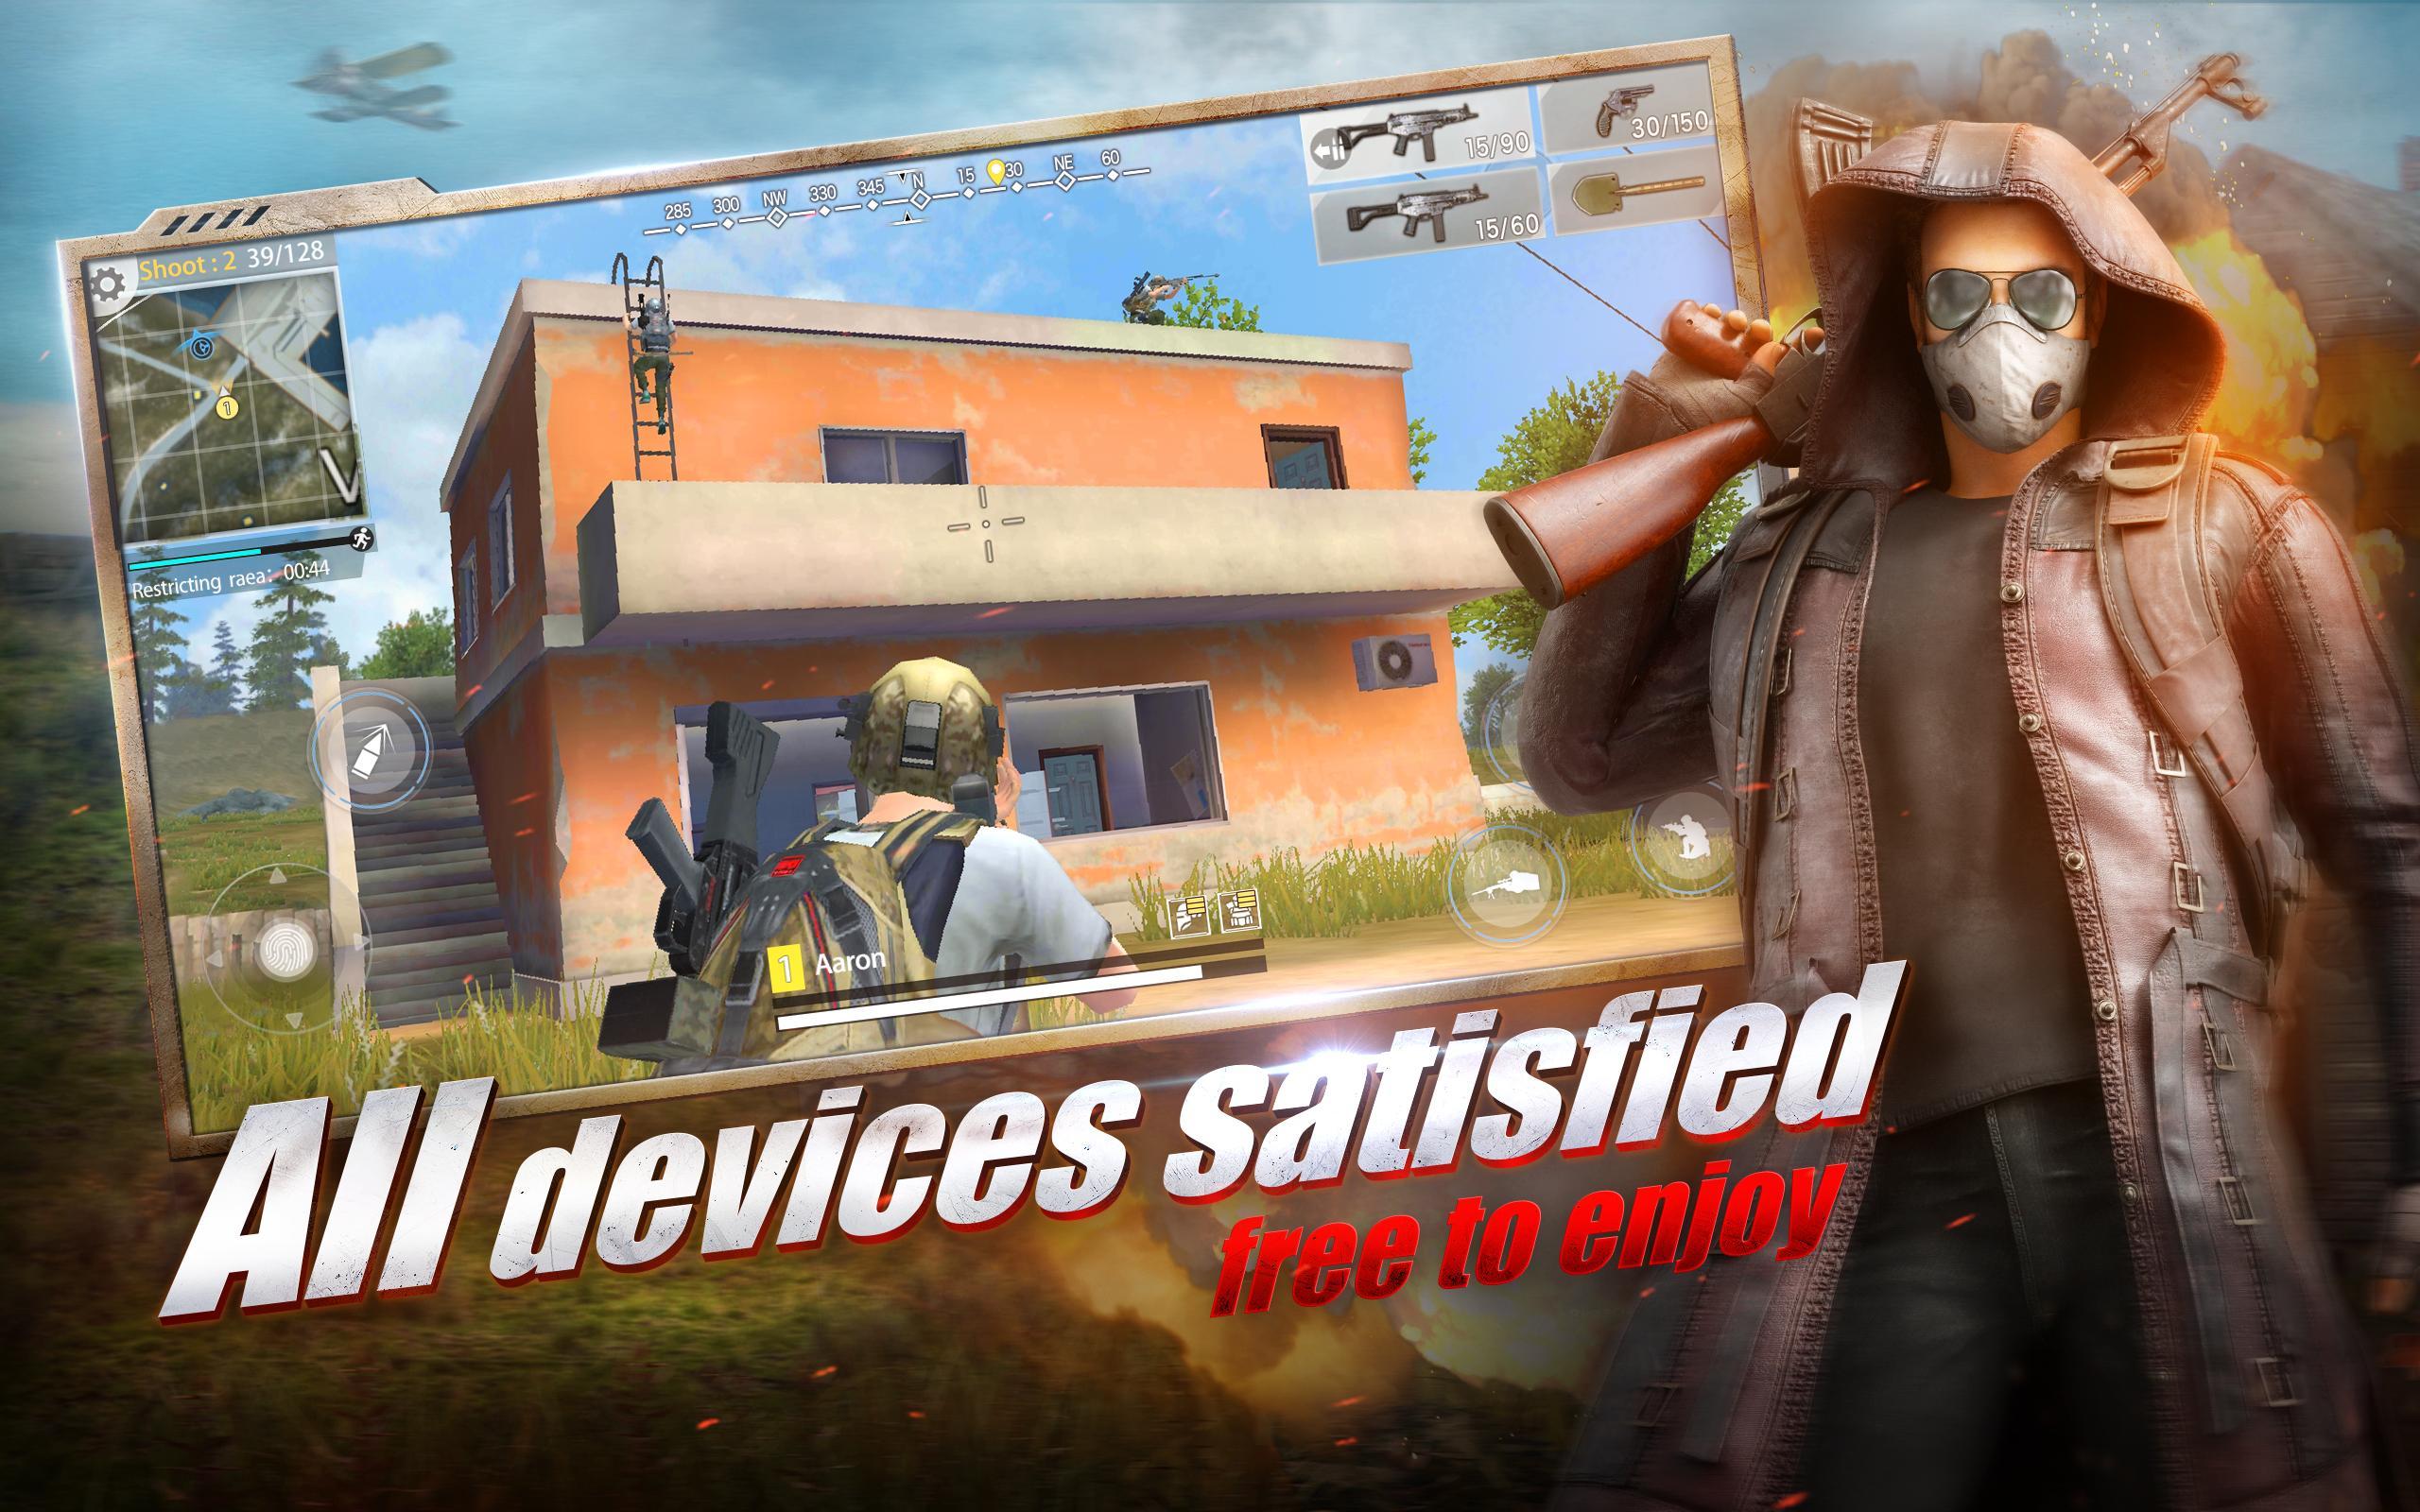 Hopeless Land For Android Apk Download - avatares de roblox chidos roblox robux hack 134 download